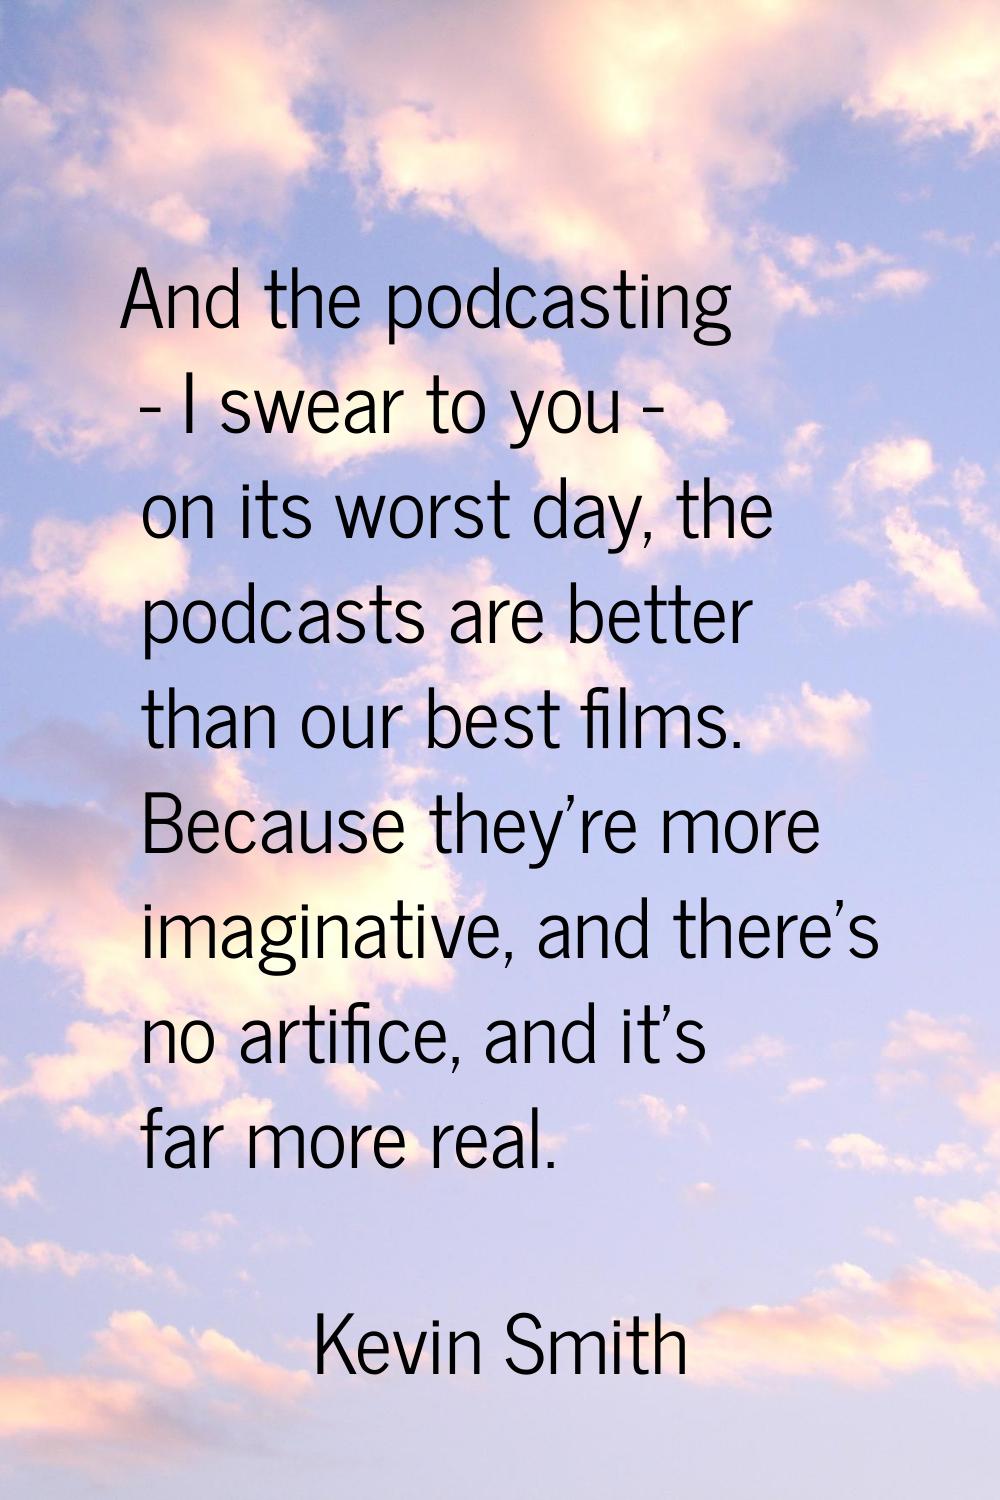 And the podcasting - I swear to you - on its worst day, the podcasts are better than our best films